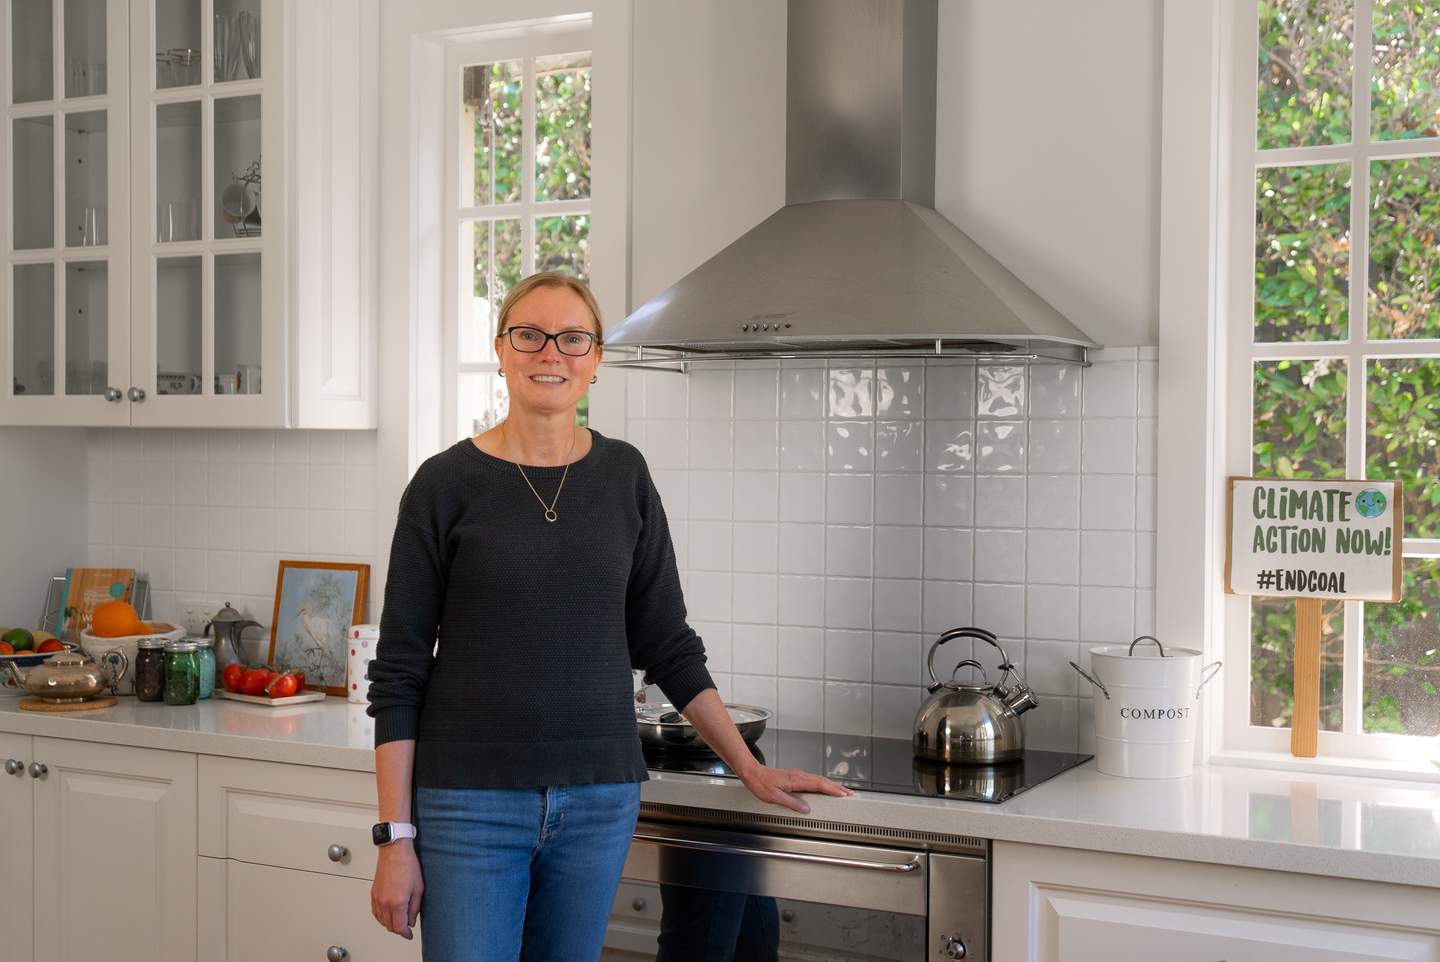 Kylie, a caucasian woman, stands in front of her induction cooktop in her bright white kitchen